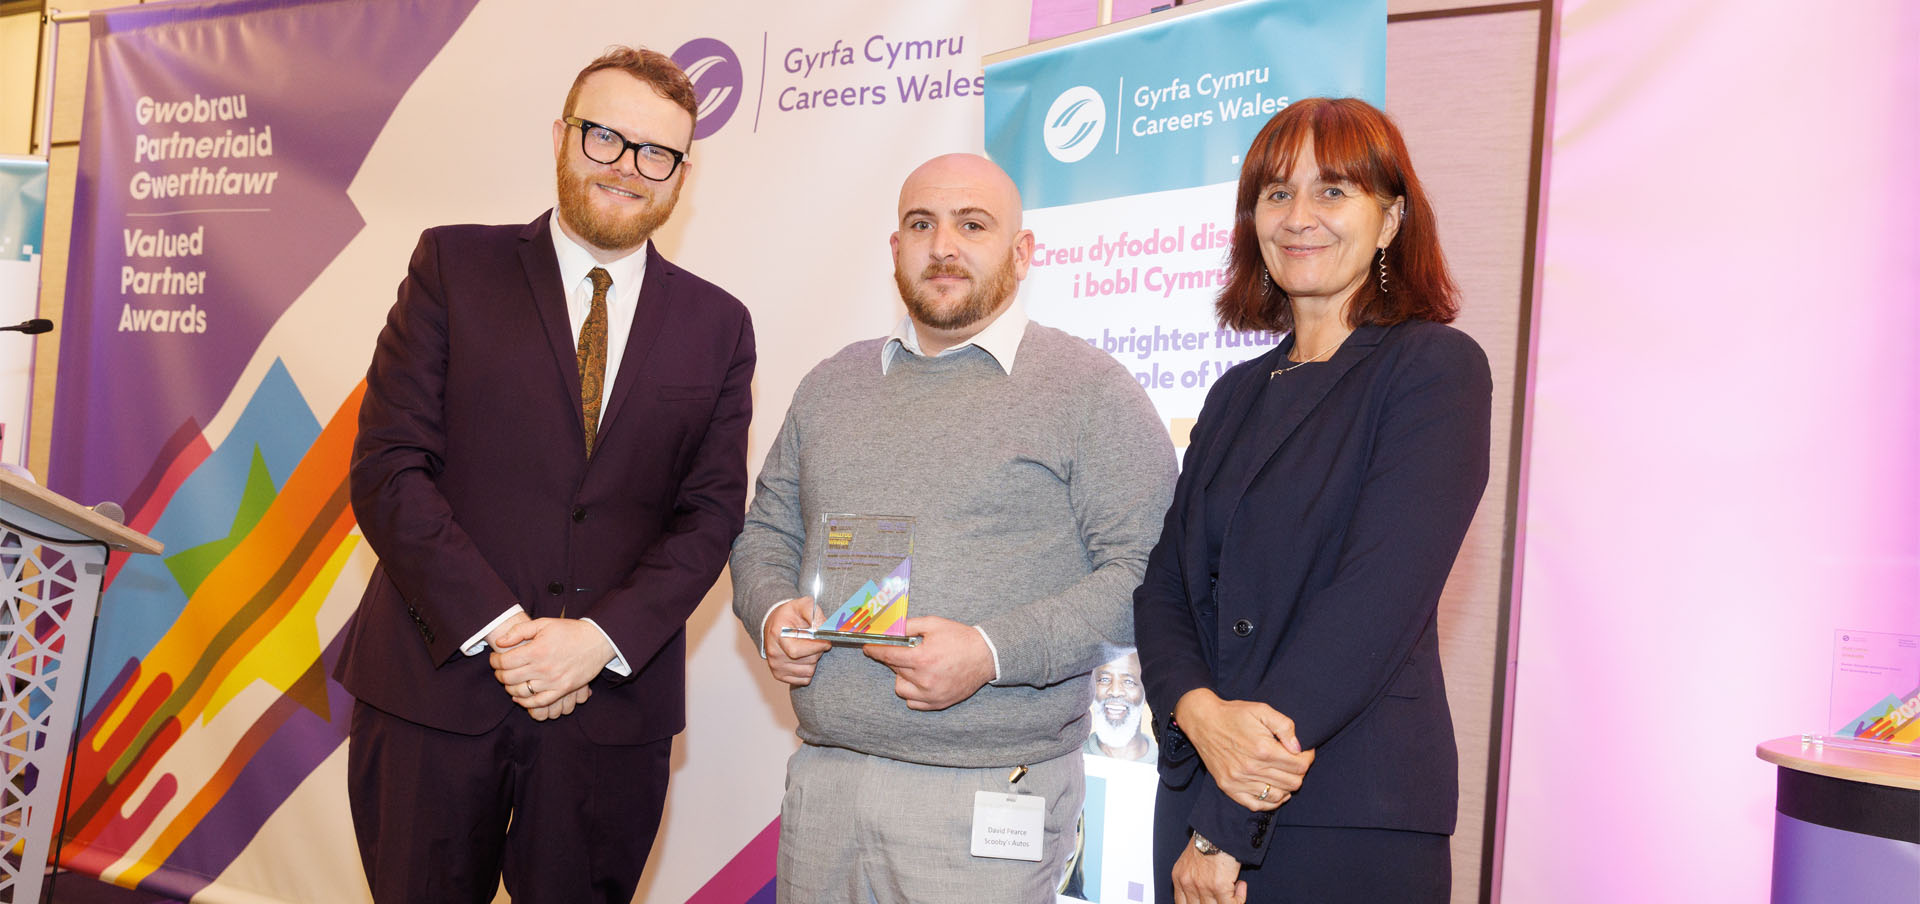 David Pearce from Scooby’s Autos being presented with their award by presenter Huw Stephens and Nikki Lawrence, Chief Executive, Careers Wales